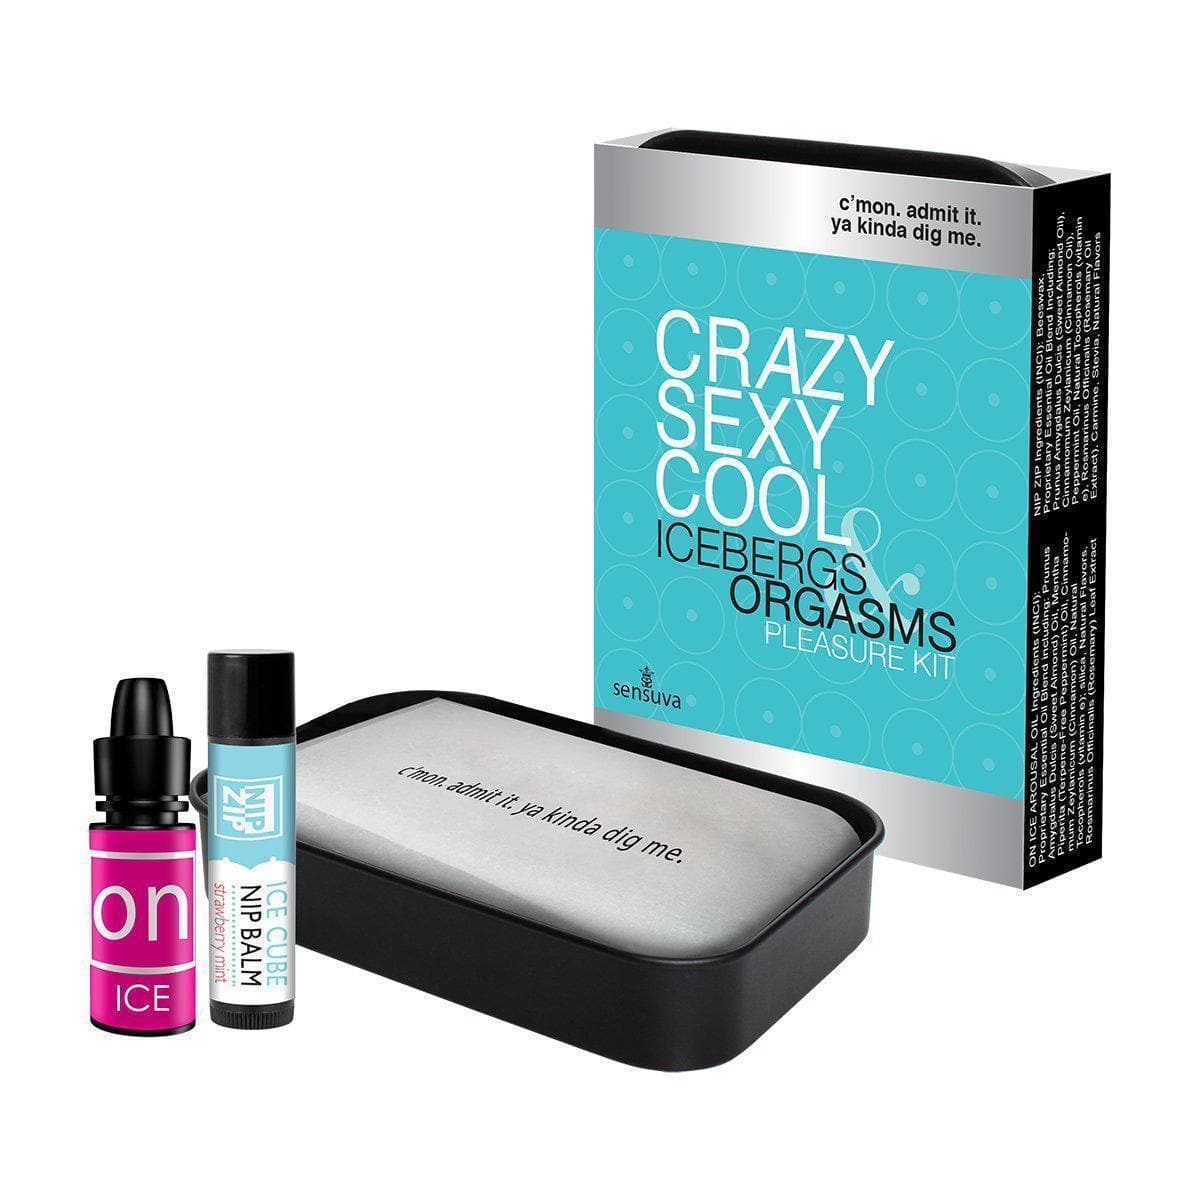 Crazy Sexy Cool Icebergs & Orgasms Couples Arousal Pleasure Kit - Romantic Blessings